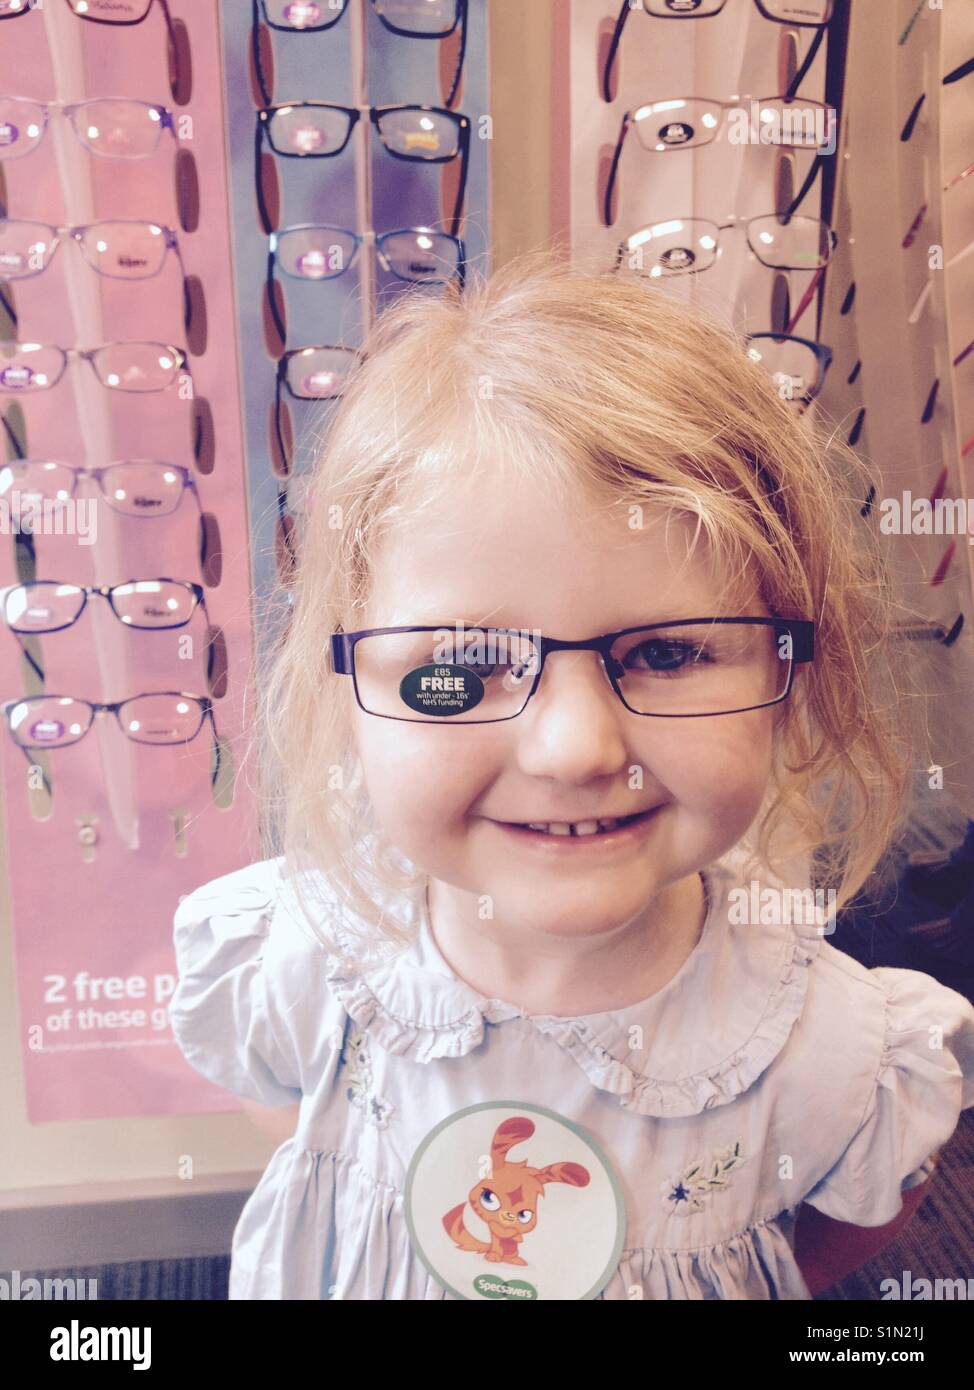 Three year old girl tries new glasses / spectacles on at an optician store. Stock Photo